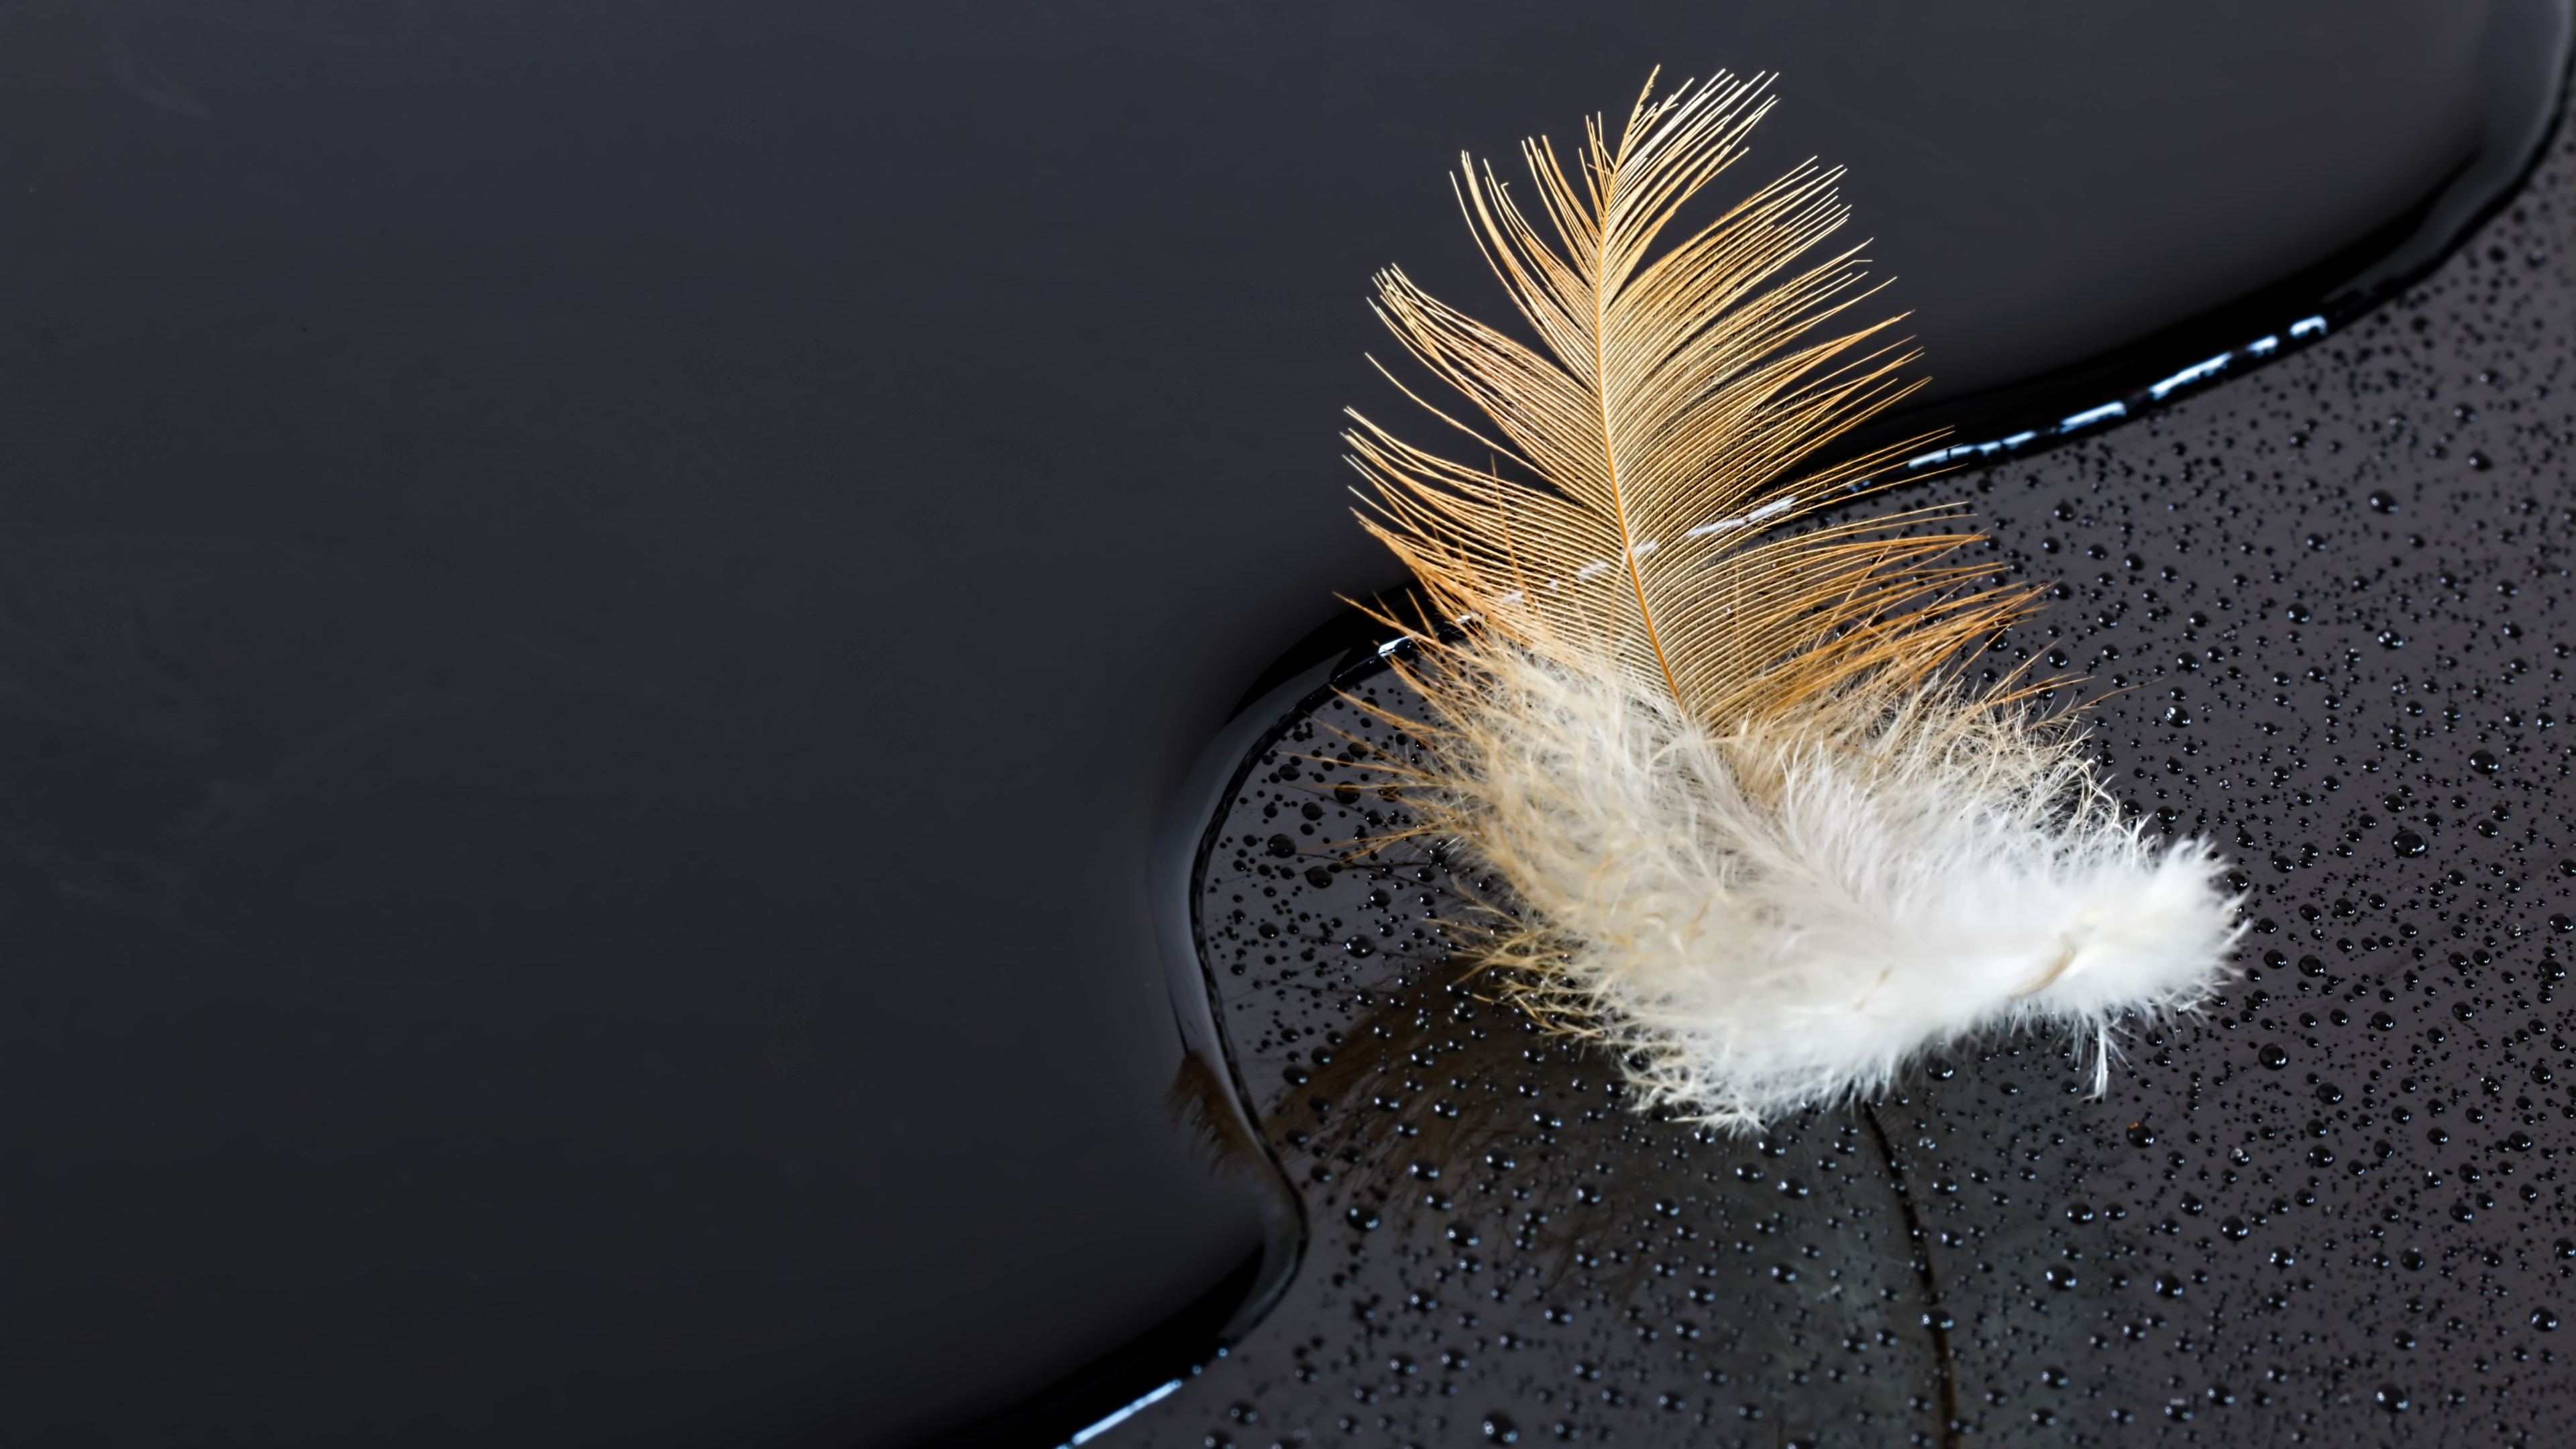 Dark surface with a feather on water wallpaper 3840x2160